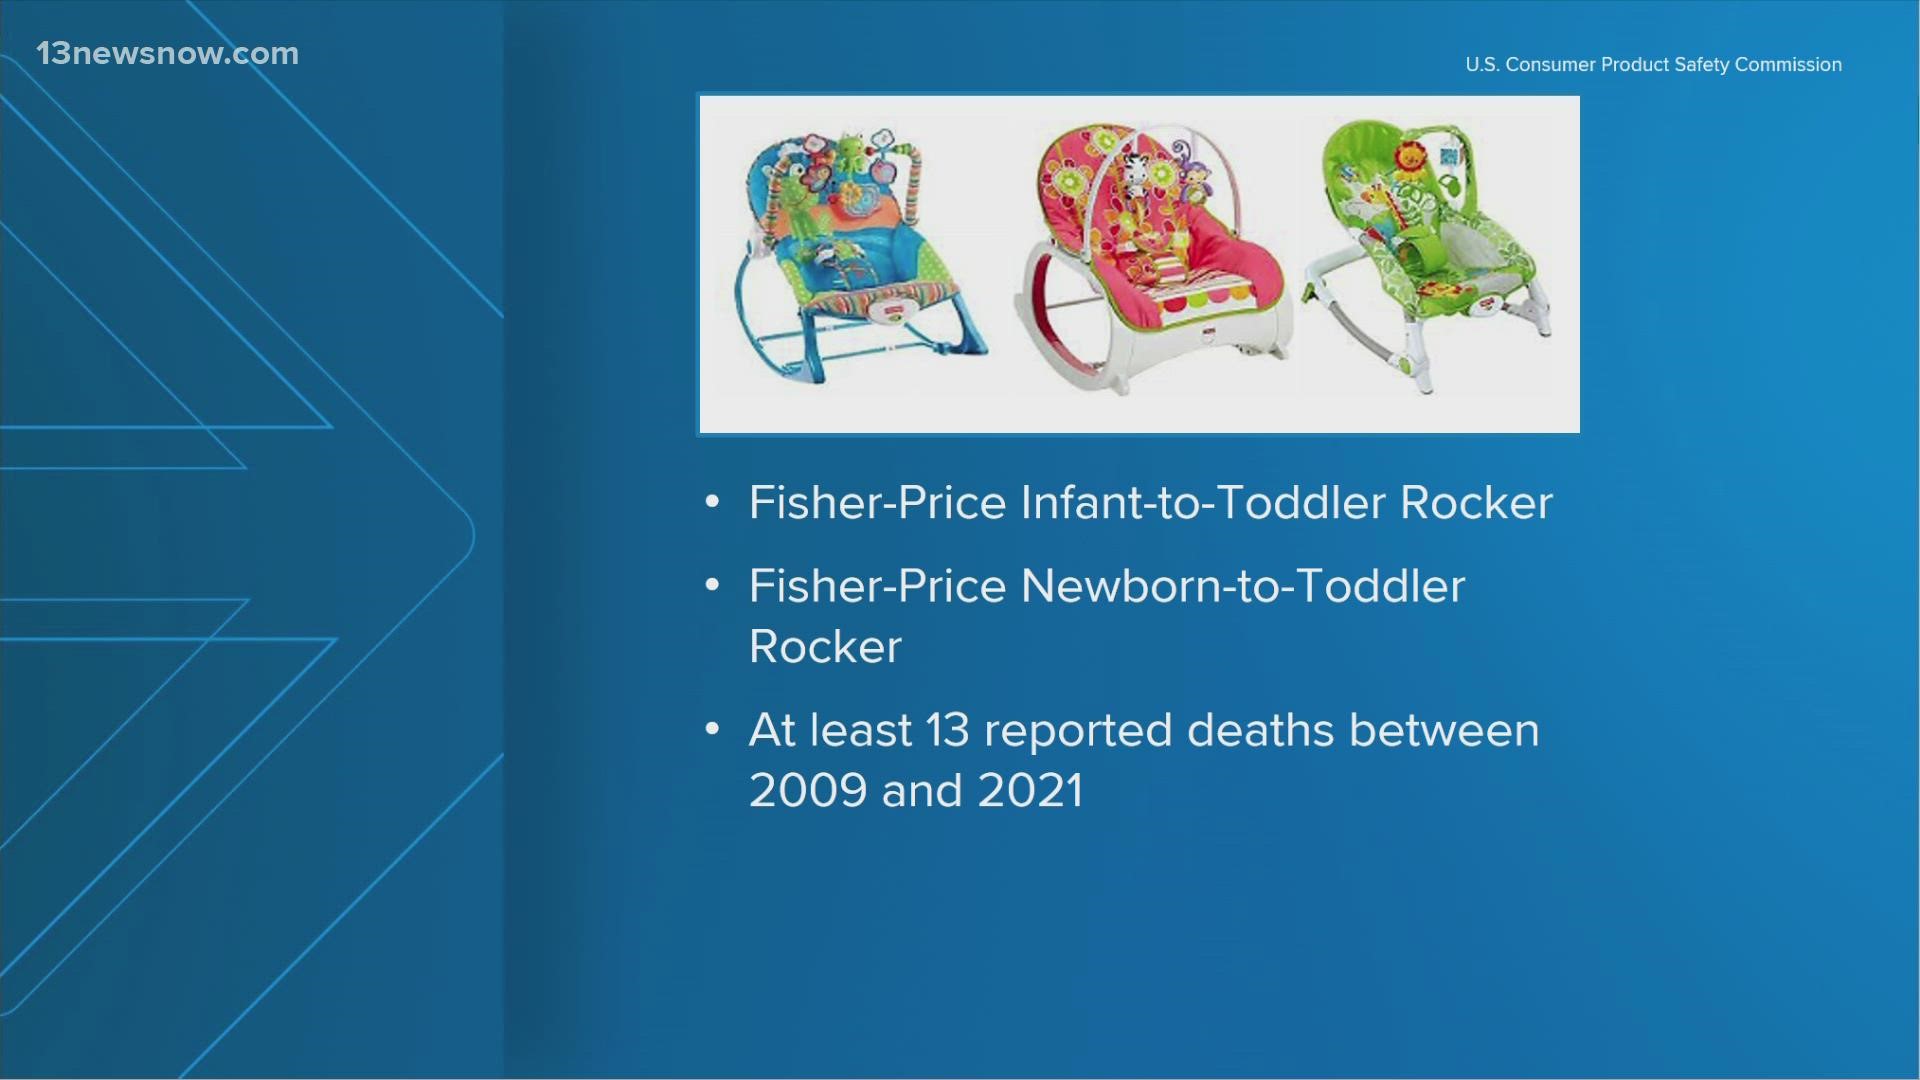 No official recall has been noticed, but the company wants to remind parents that these rockers are not to be used as beds for babies.